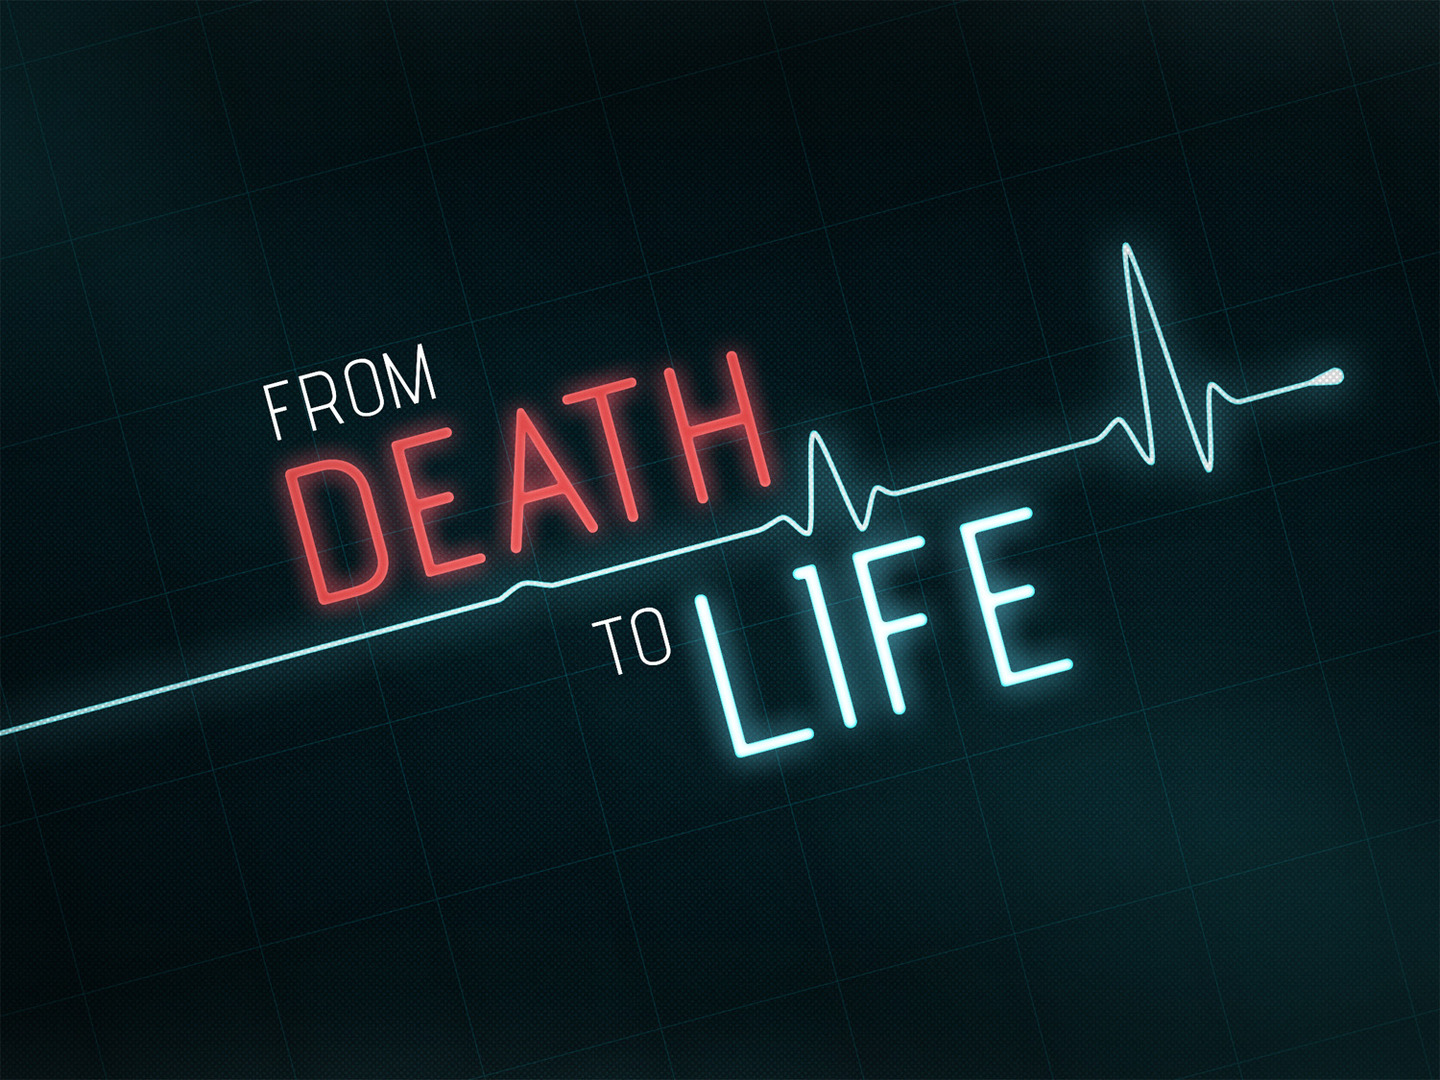 From Death to Life: Death is Defeated